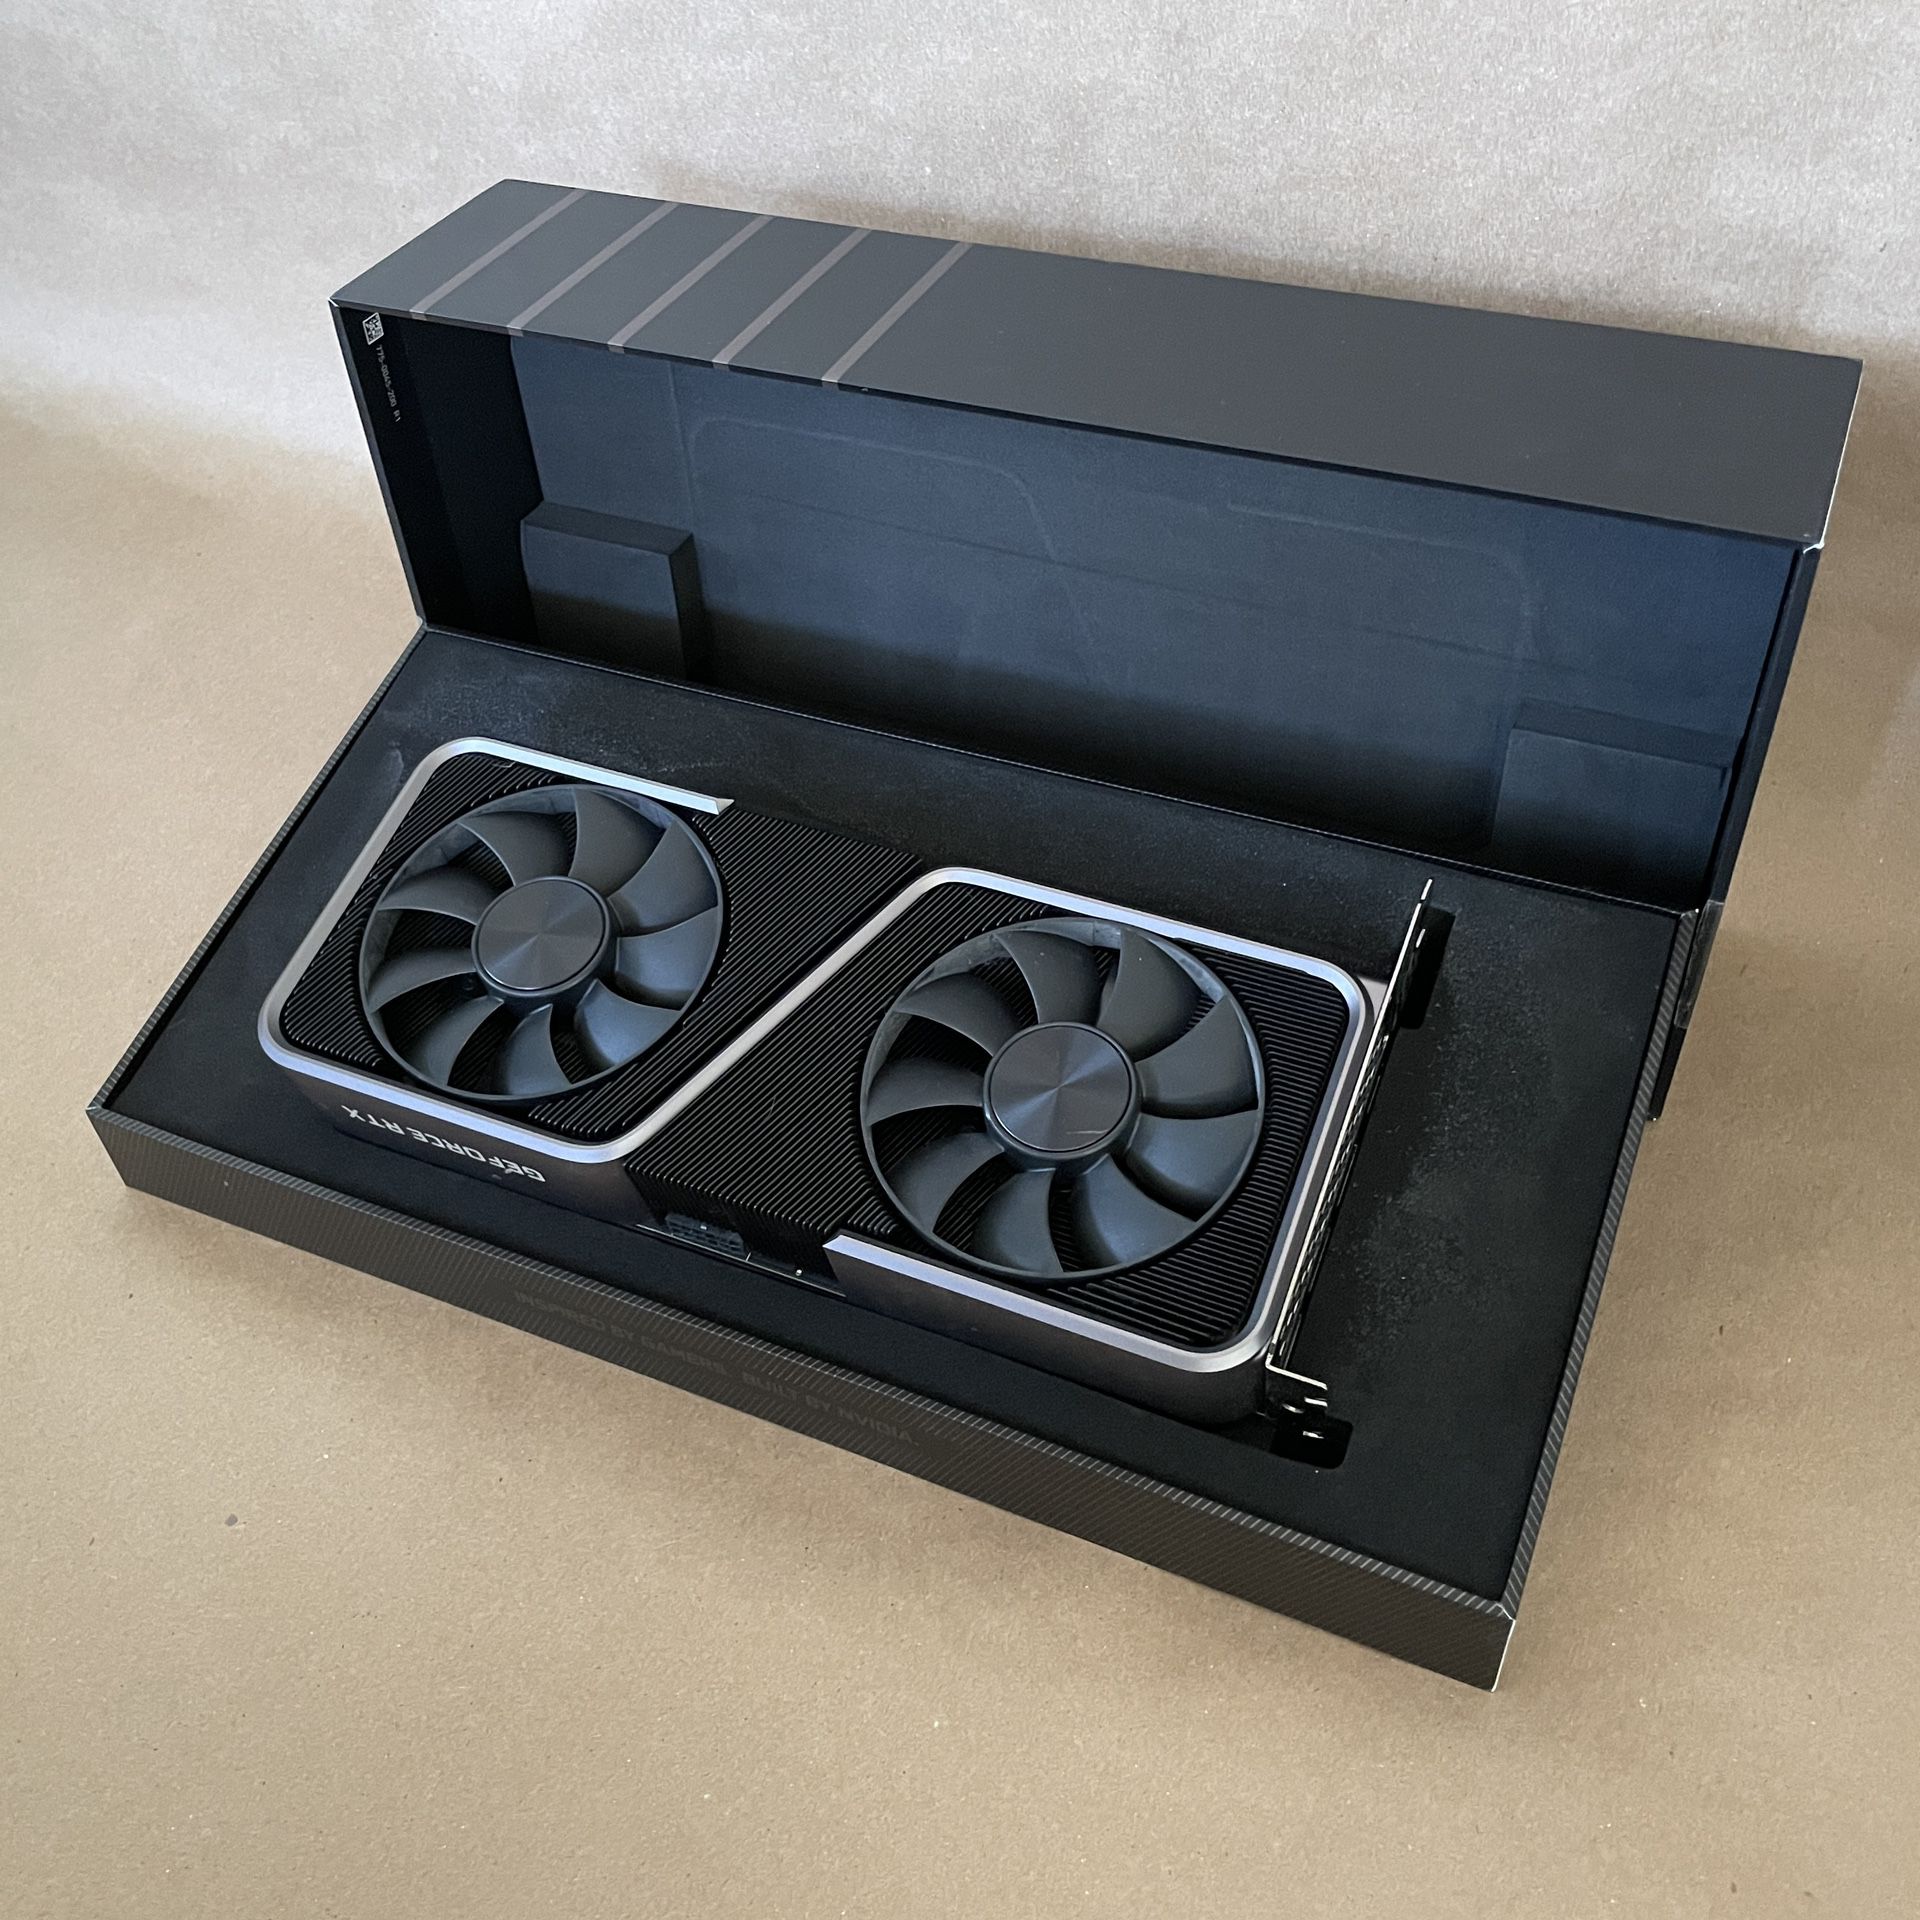 NVIDIA GeForce RTX 3070 Founders Edition 8GB GDDR6X Graphics Card 